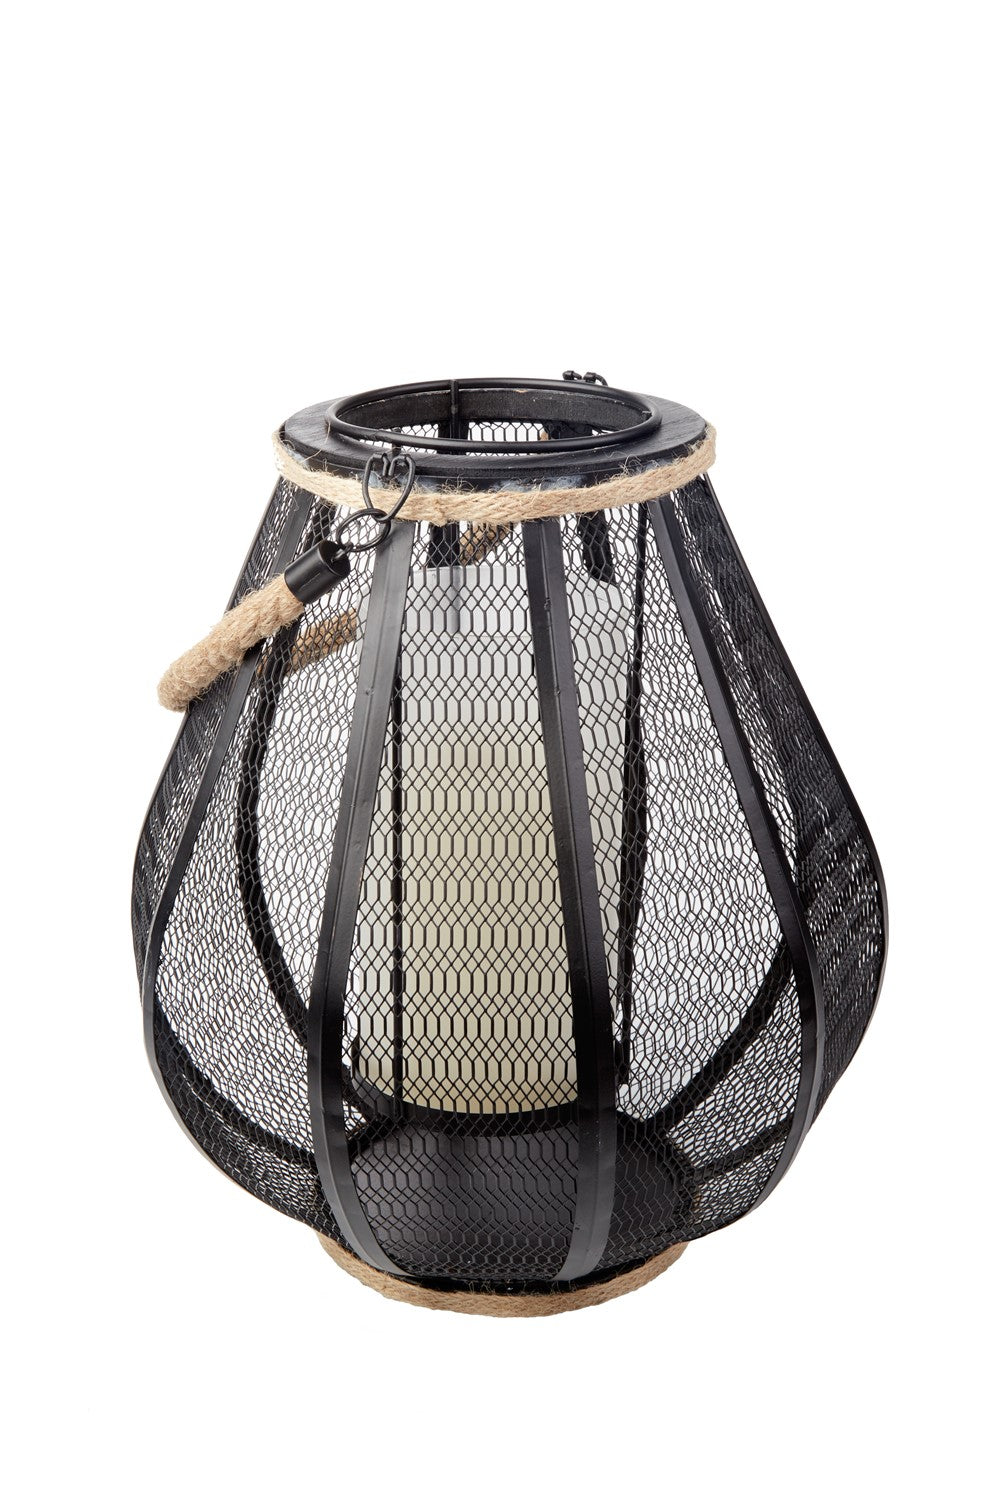 Dahl Candle Lantern with Dancing LED Flame